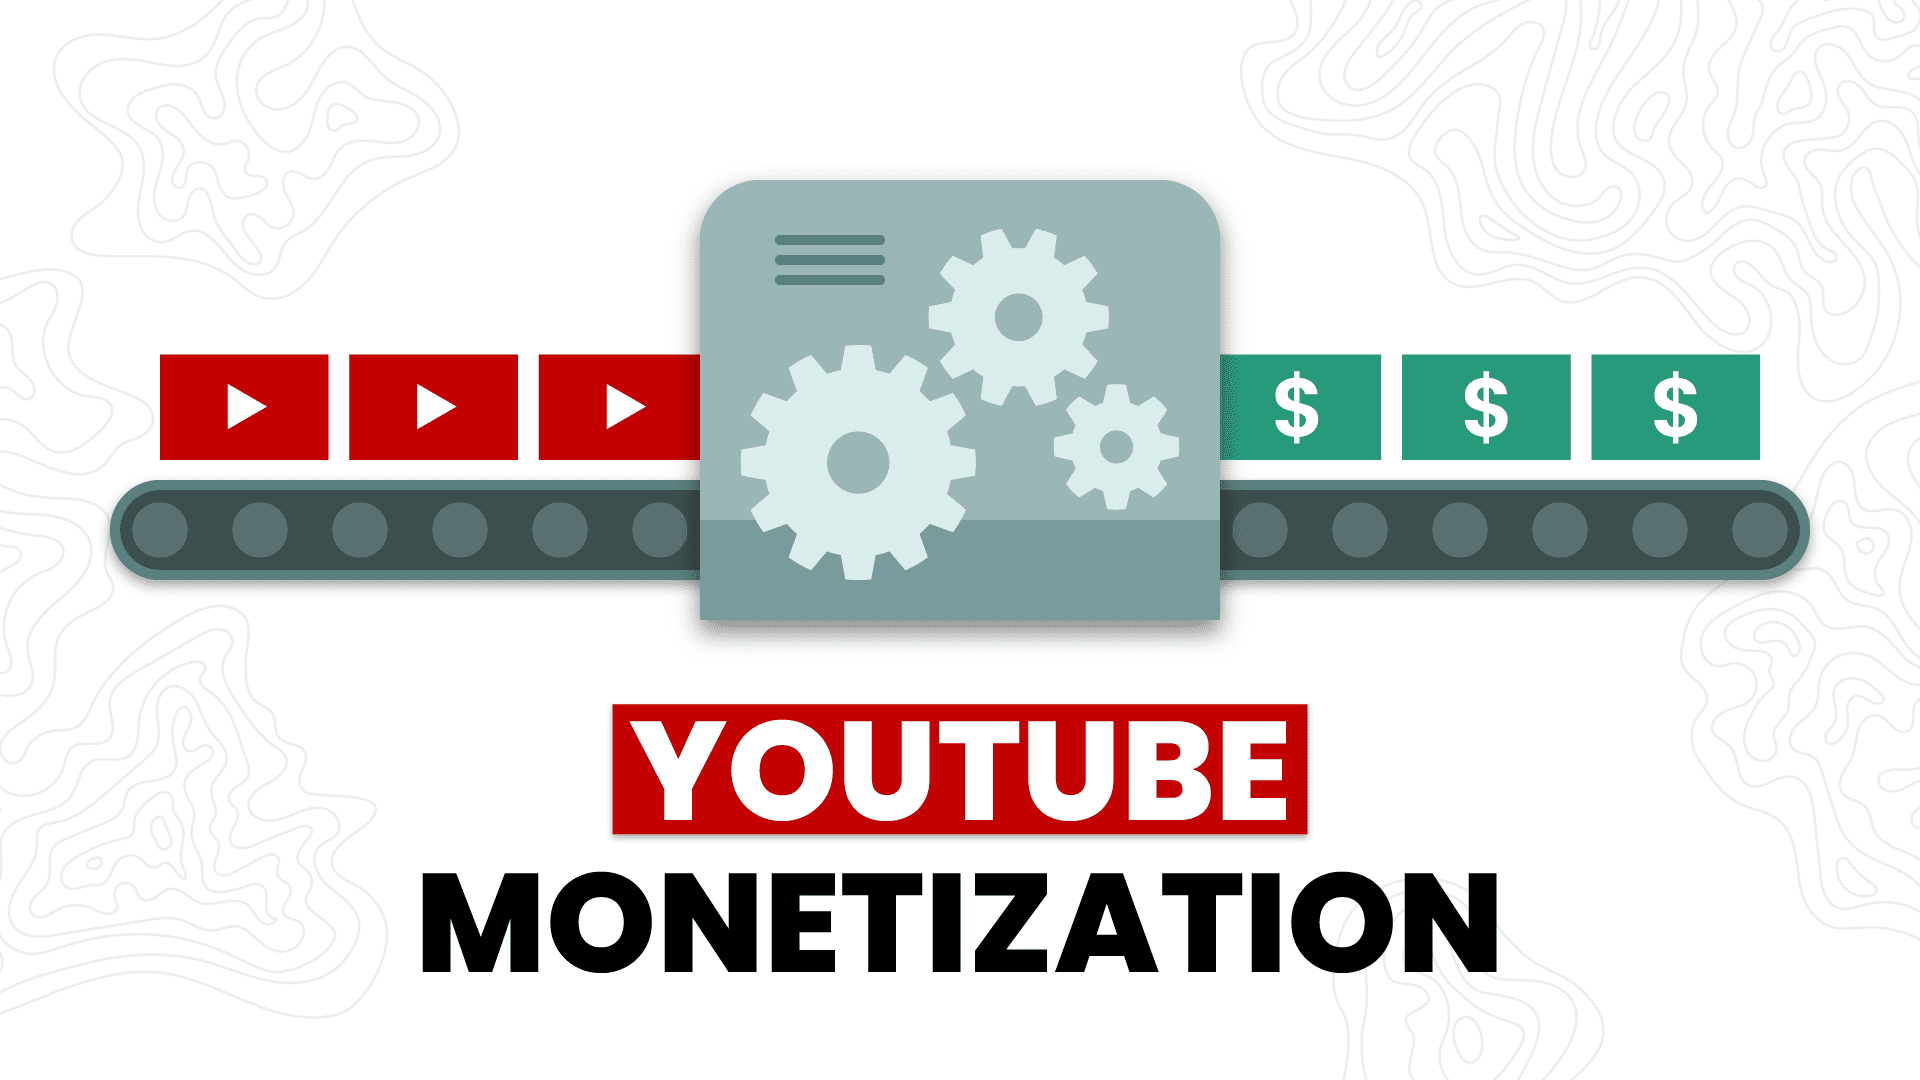 YouTube monetization machine - videos entering and leaving as money